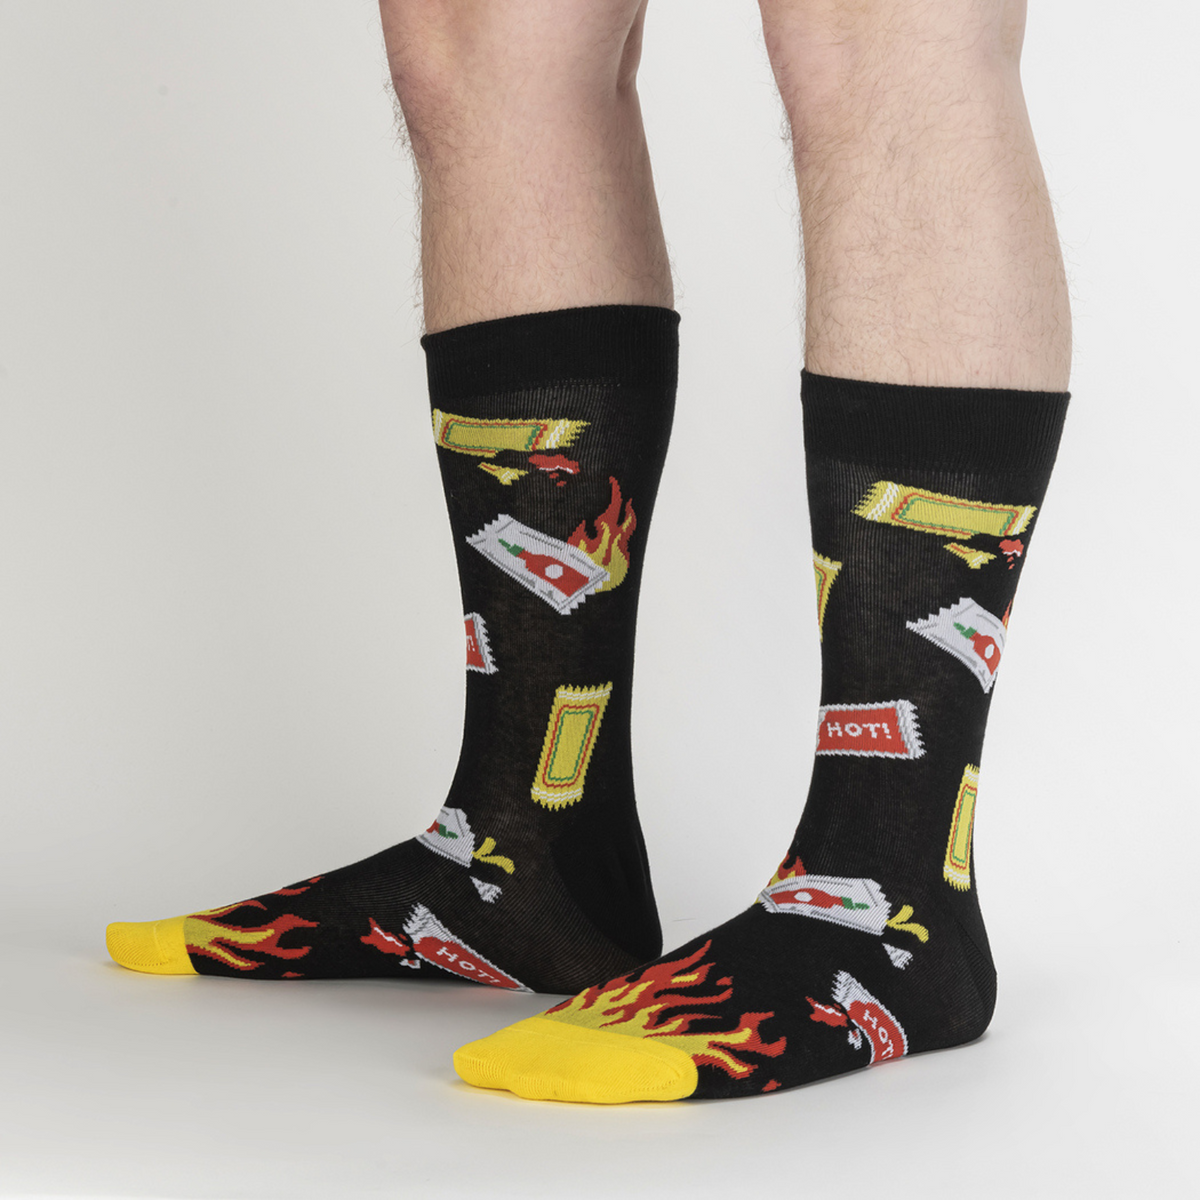 Sock It To Me Extra Hot men&#39;s sock featuring black crew sock with hot sauce packets and flames at toes worn by model seen from side